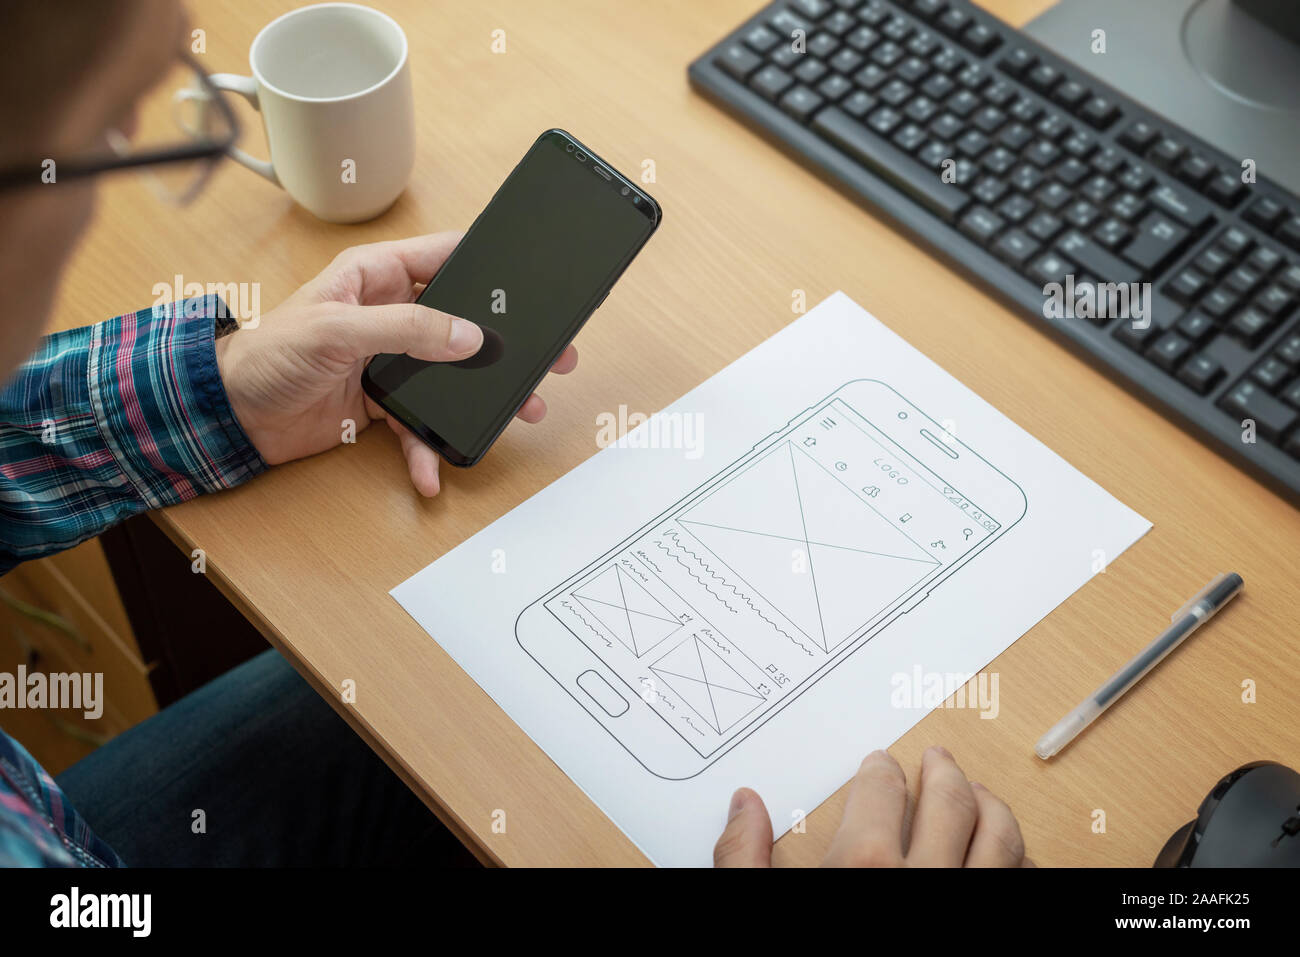 Designer sketches the layout of a responsive website or app and tests it on a mobile phone. Close up, work desk with computer beside. Stock Photo